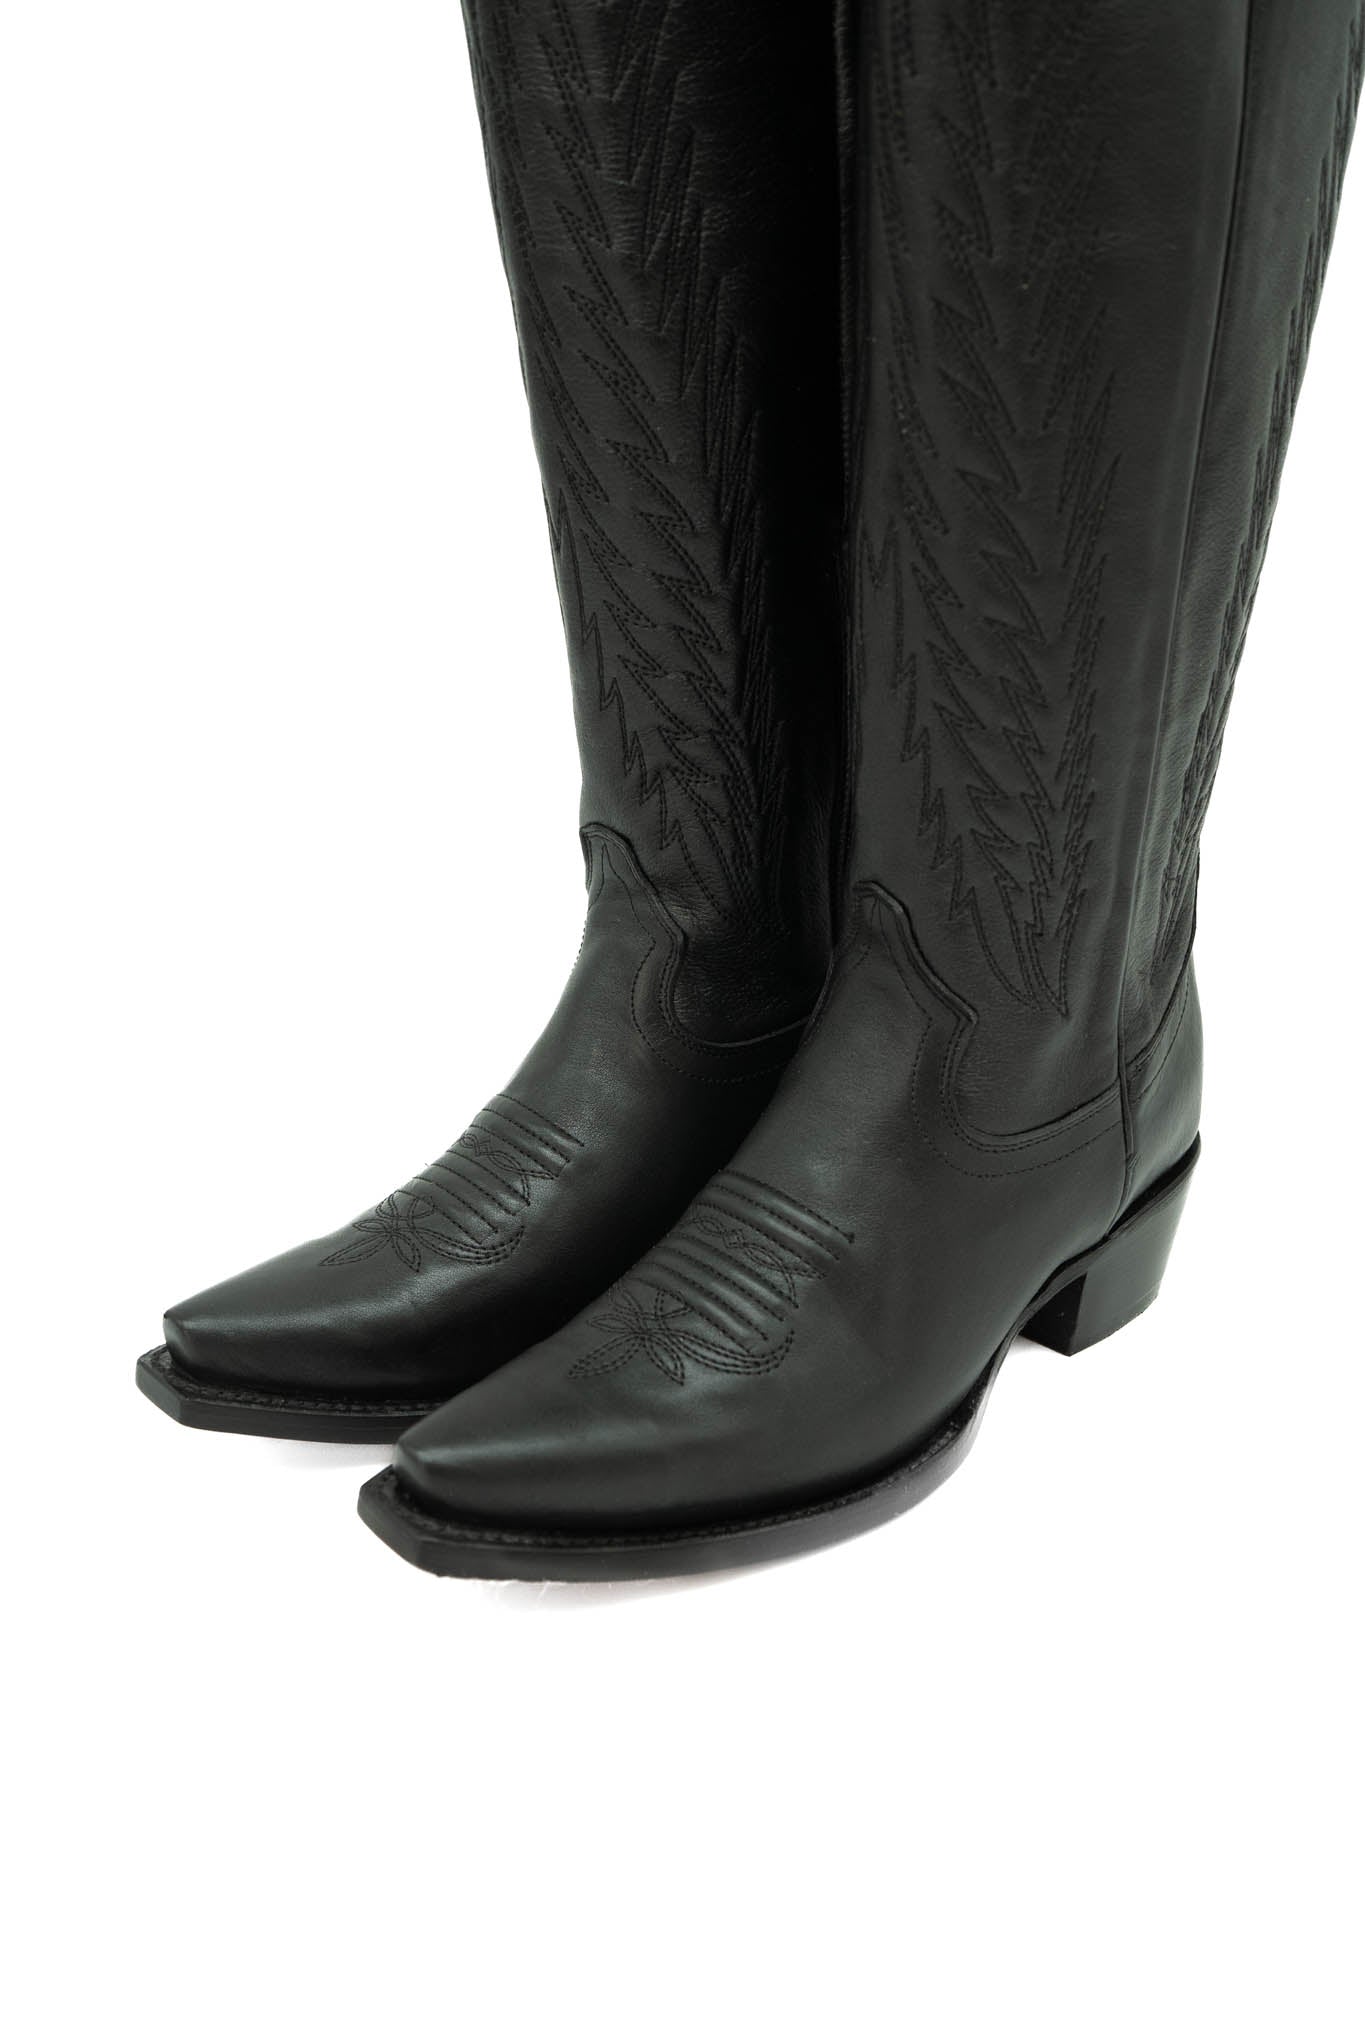 Woman Cowboy Boots in Black Calfskin with Red Embroidery, SANTA FE